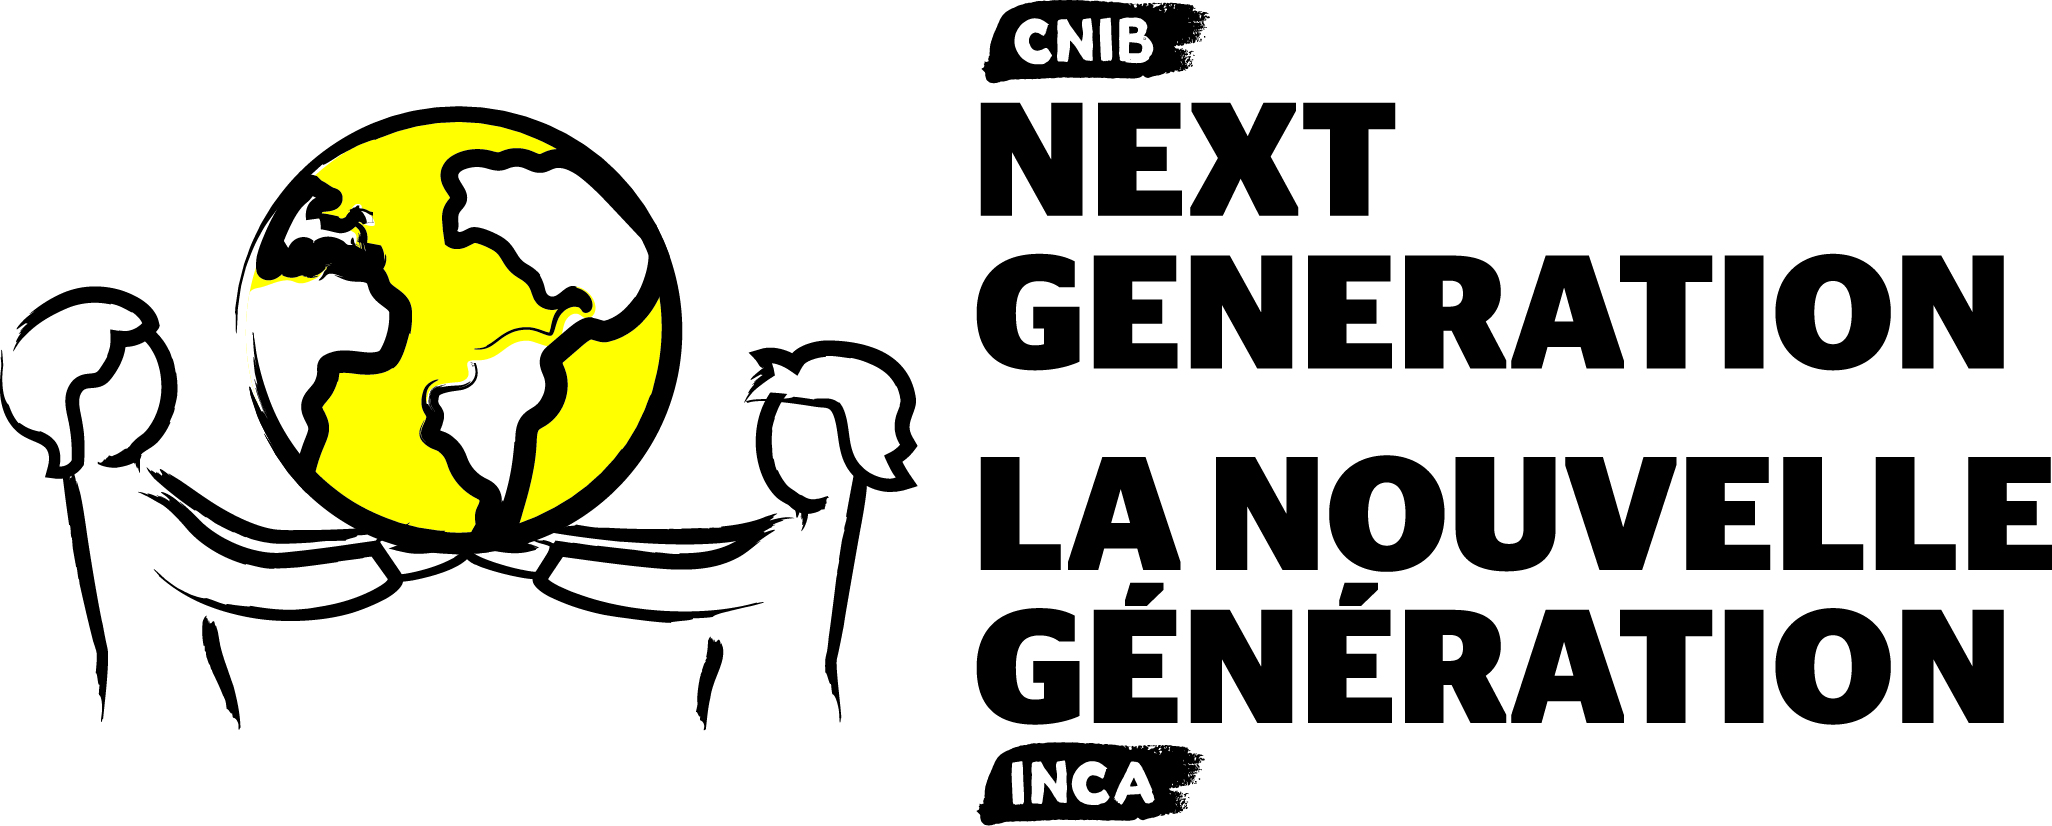 CNIB Next Generation logo. A silhouette illustration of two young people holding a globe. One person is on the left-hand side of the globe; another person is on the right. The globe has yellow accents, and to the right is the CNIB logo, accompanied by the text Next Generation.